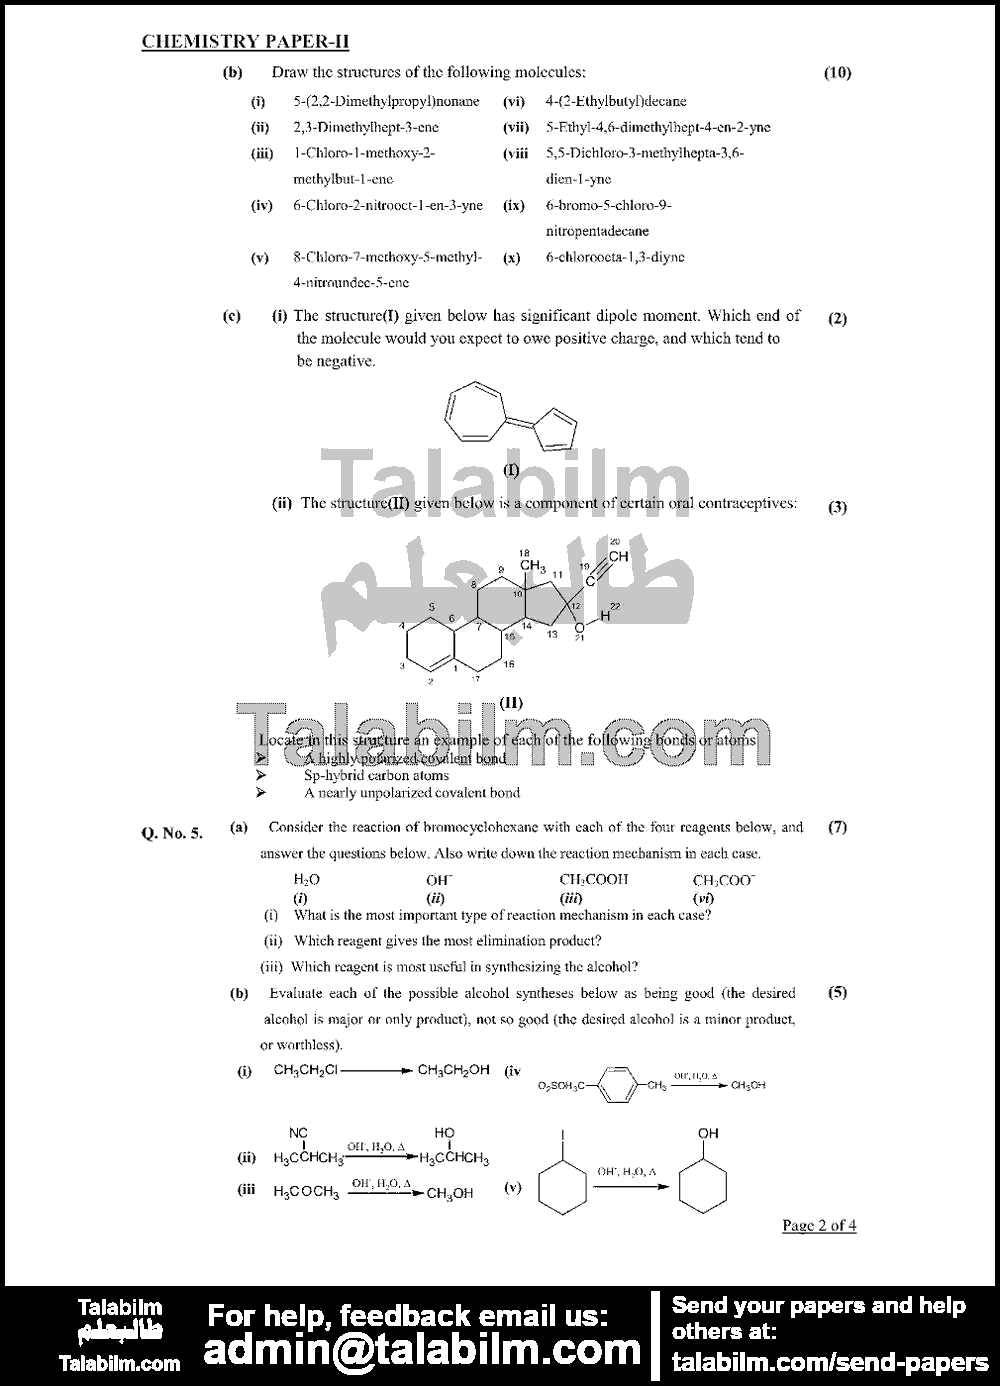 Chemistry 0 past paper for 2016 Page No. 3